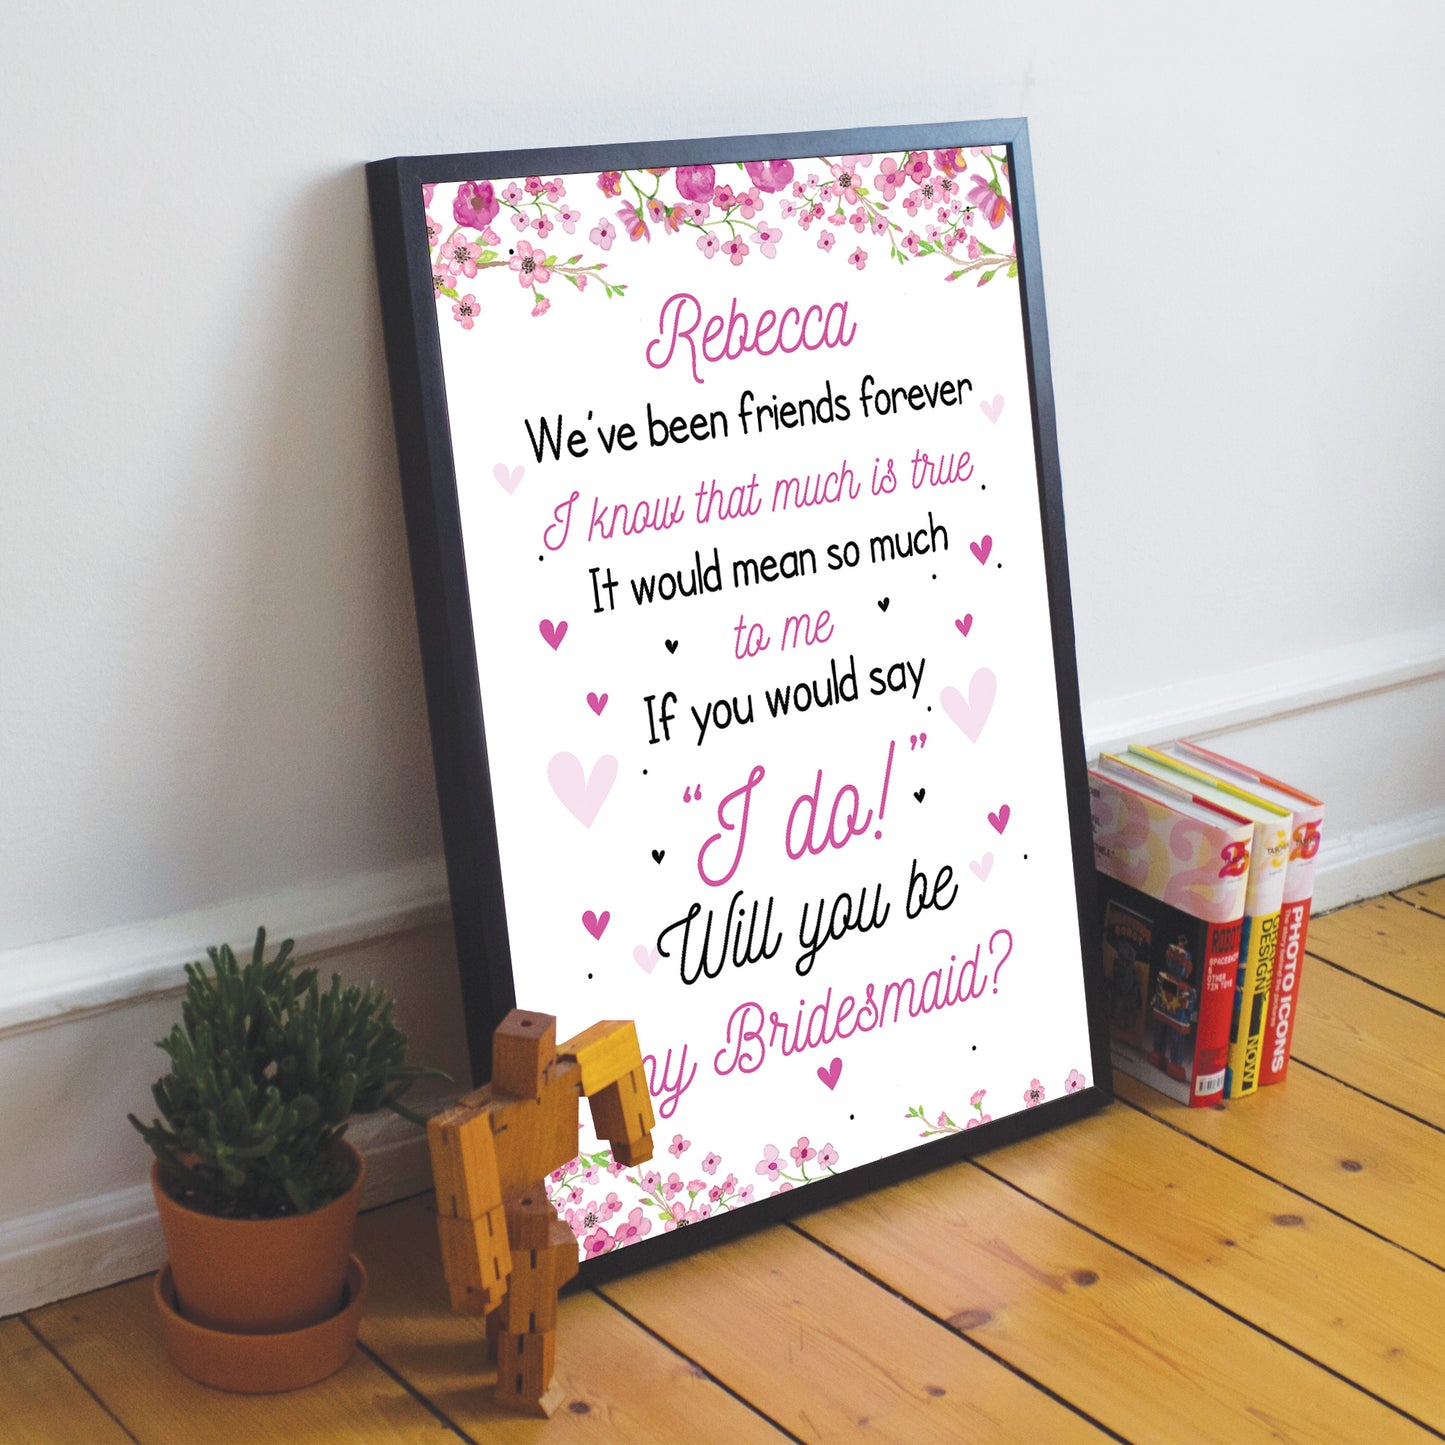 Personalised Will You Be My Bridesmaid Request Card Framed